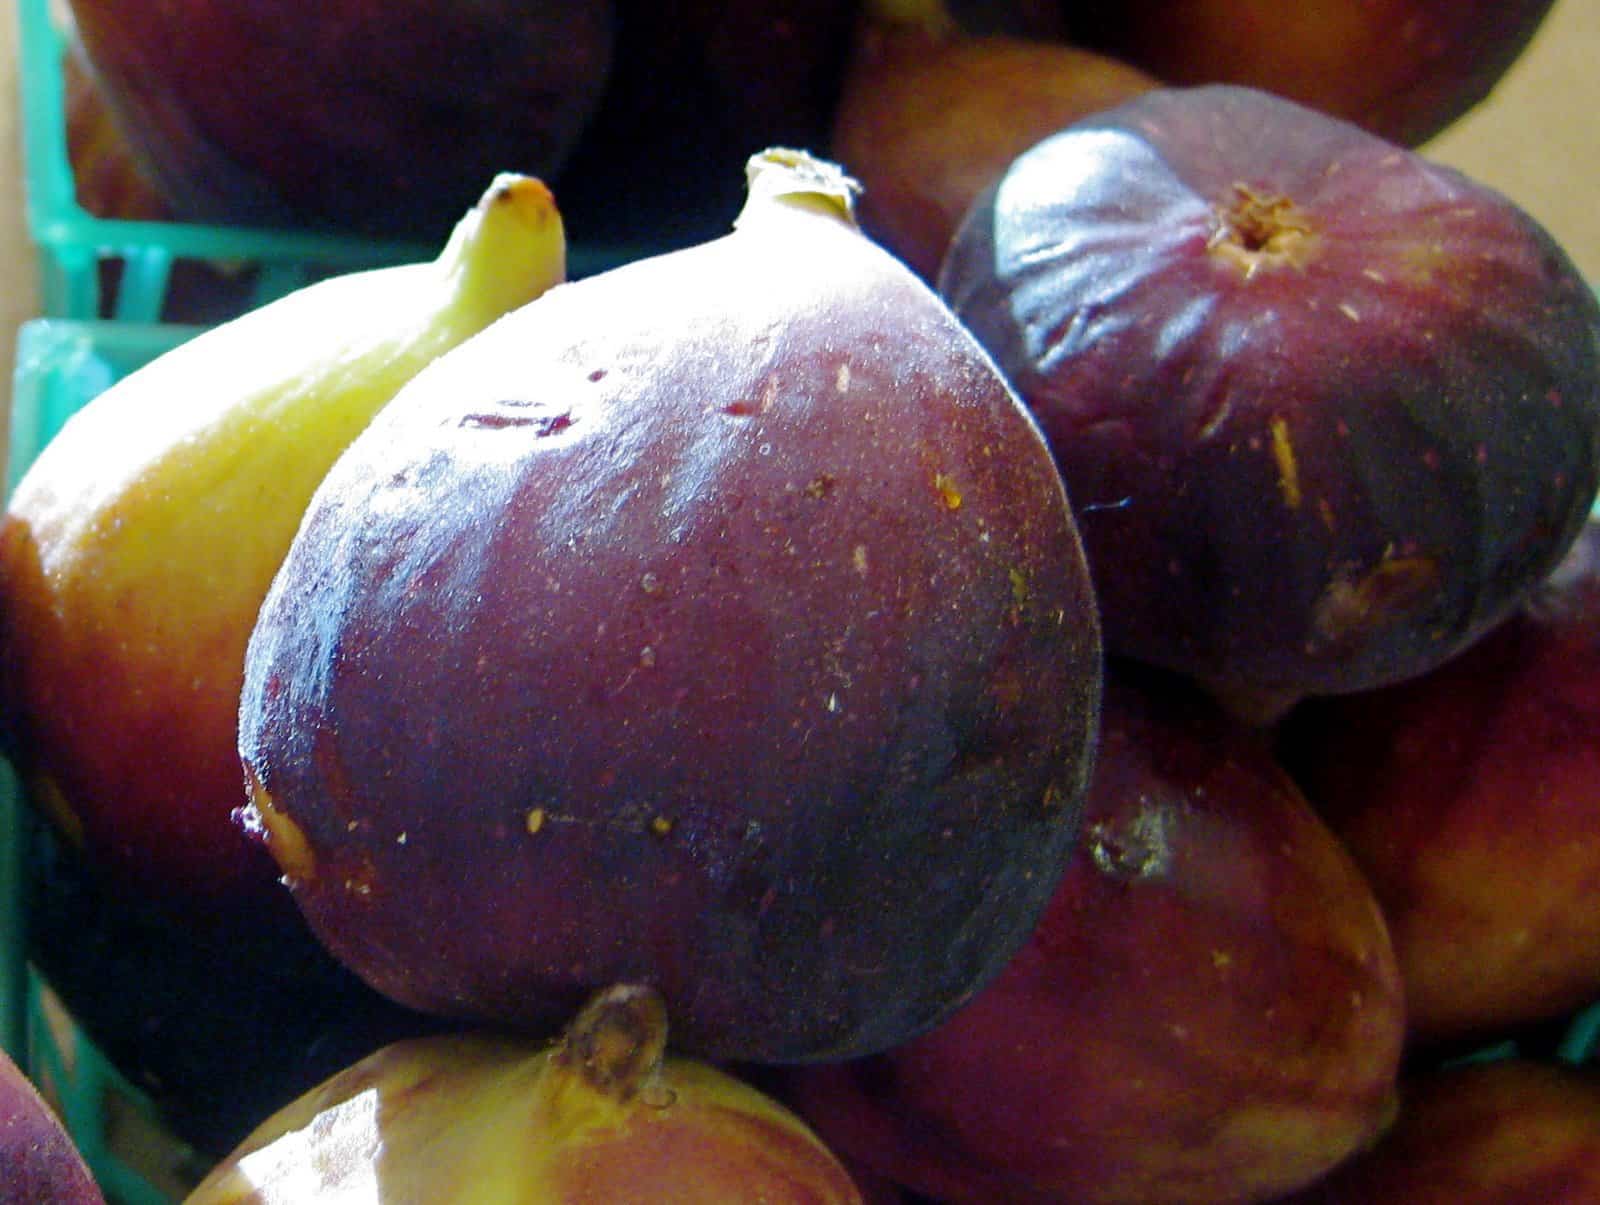 Mission Figs at the Farmer's Market